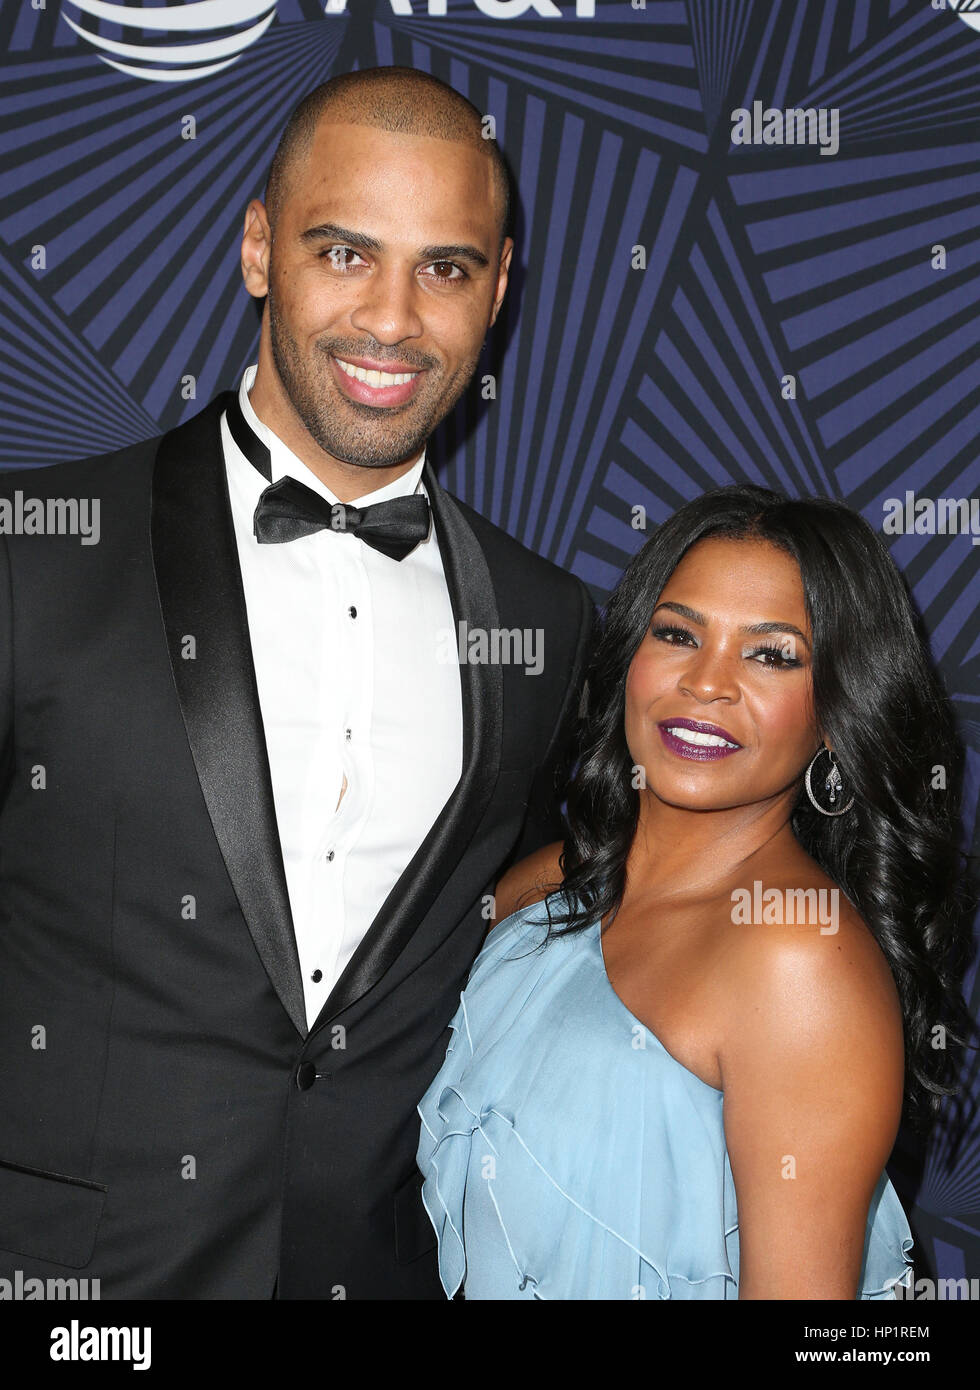 Beverly Hills, CA. 17th Feb, 2017. Nia Long, Ime Udoka, At BET's 2017 American Black Film Festival Honors Awards, At The Beverly Hilton Hotel In California on February 17, 2017. Credit: Faye Sadou/Media Punch/Alamy Live News Stock Photo